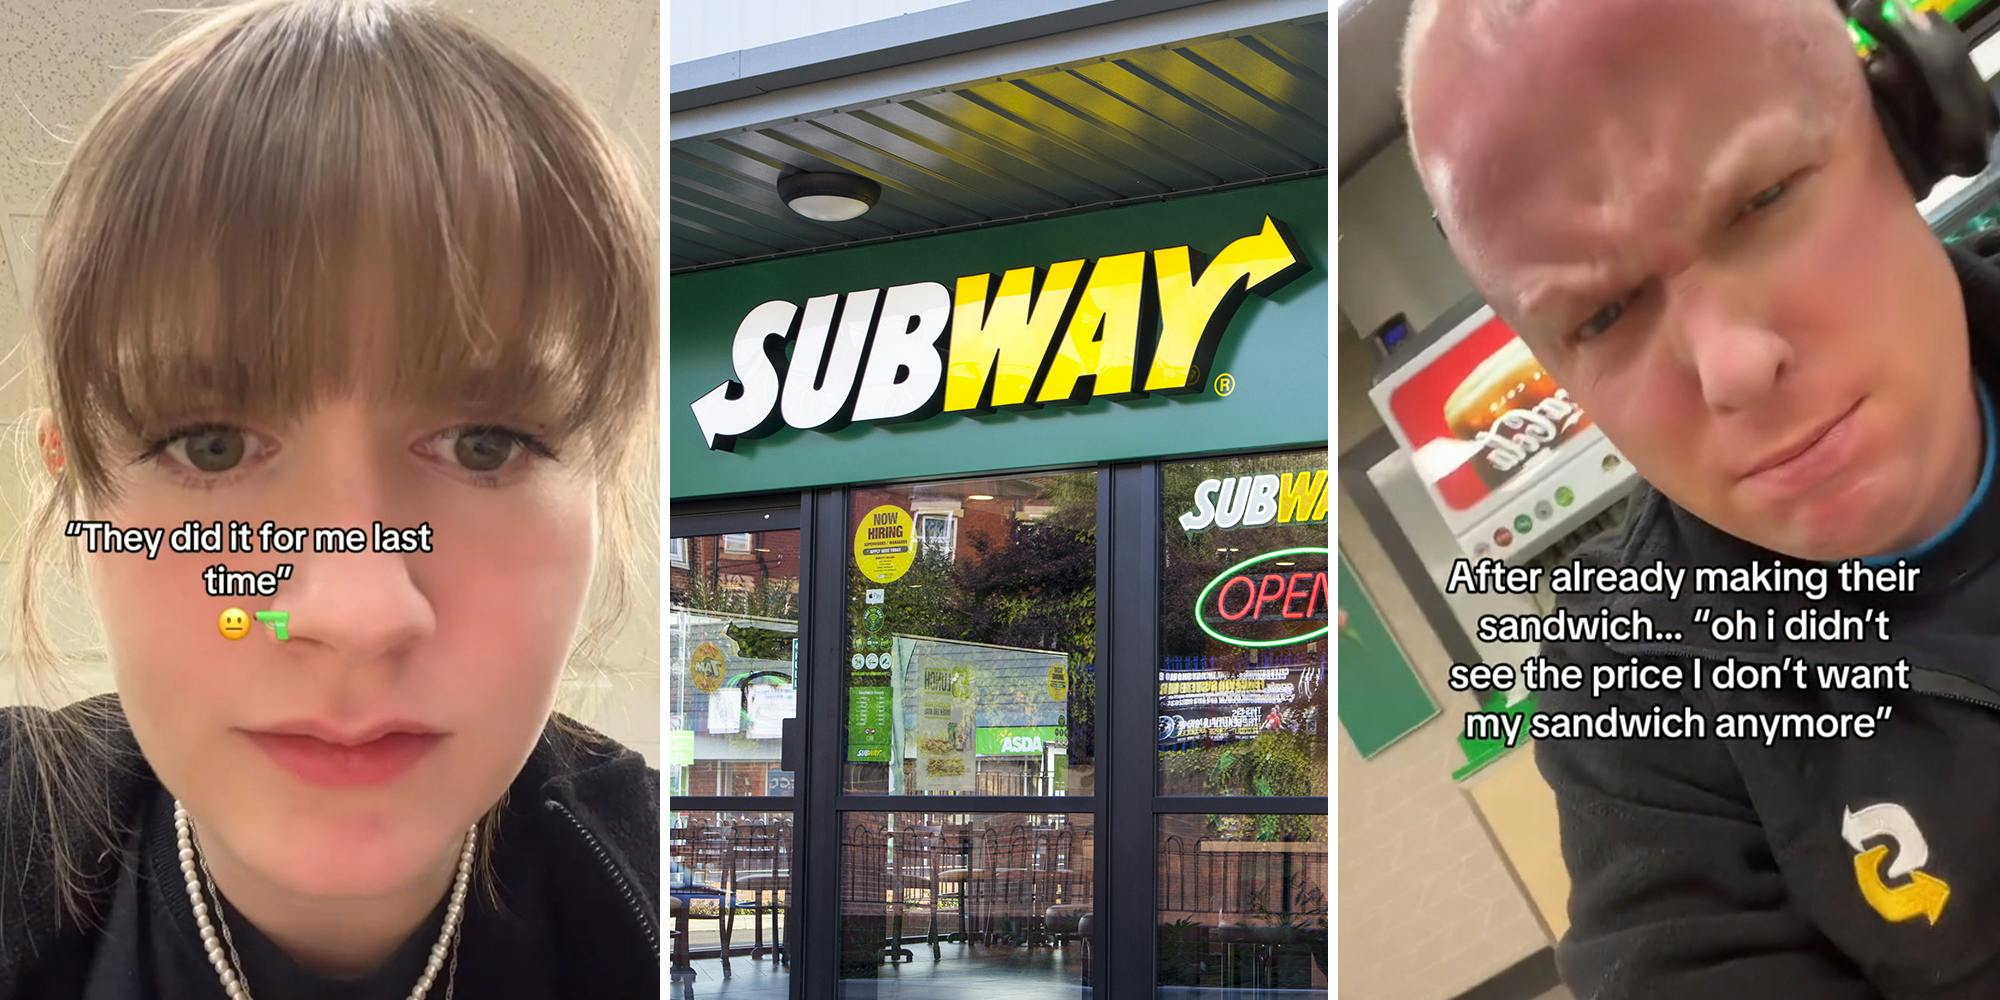 Subway worker says customer had them make a sandwich, then walked out after seeing cost